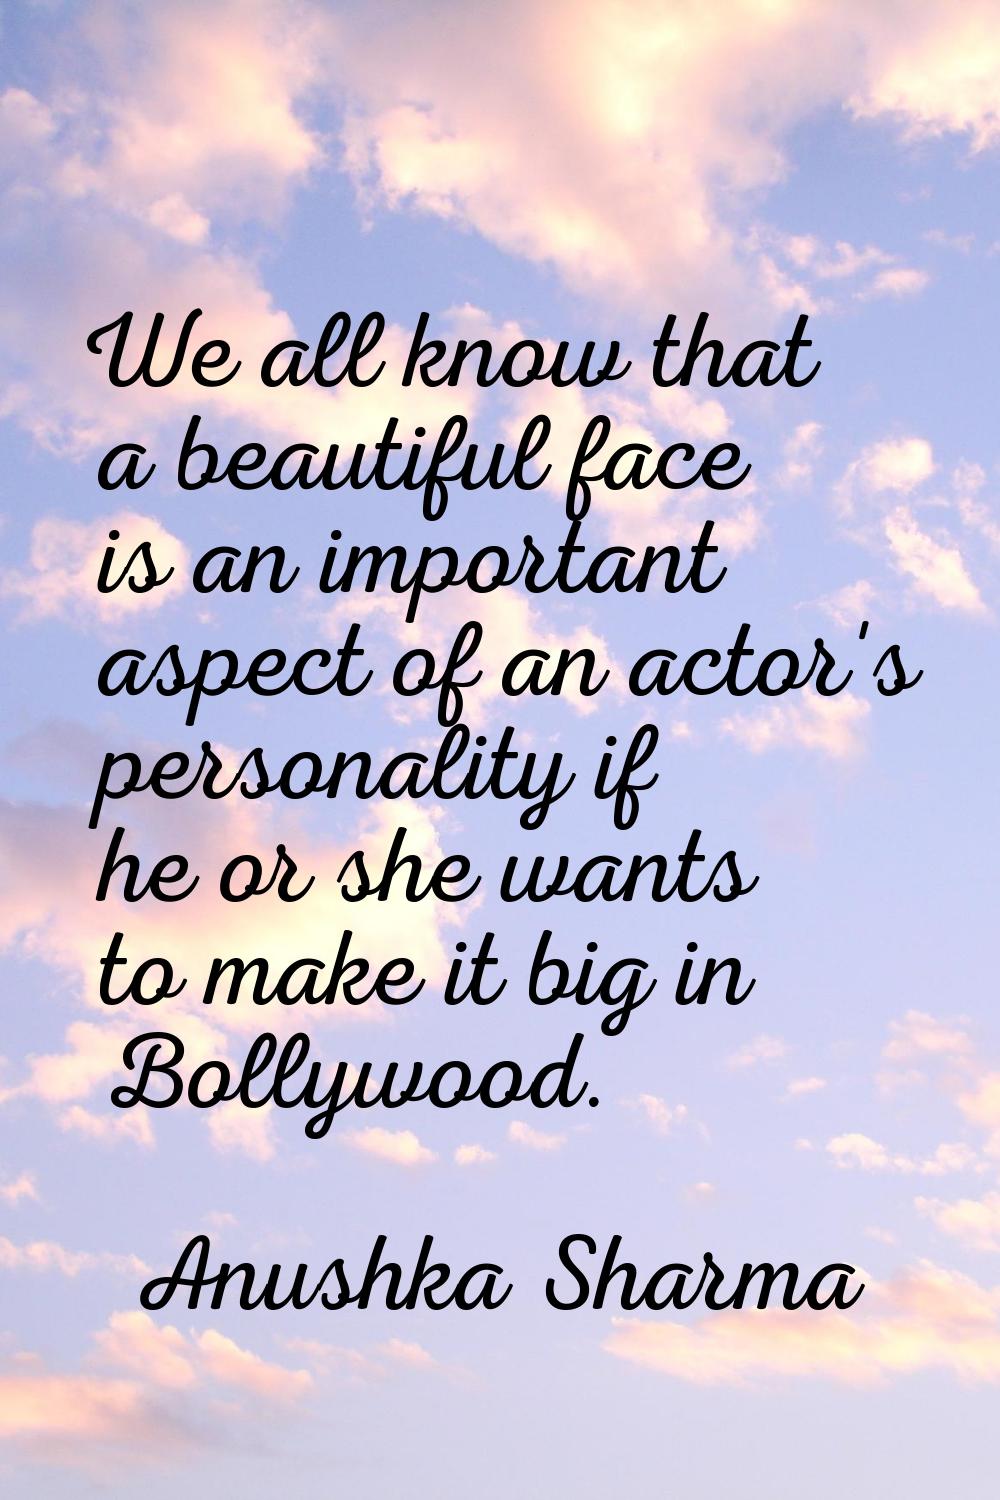 We all know that a beautiful face is an important aspect of an actor's personality if he or she wan